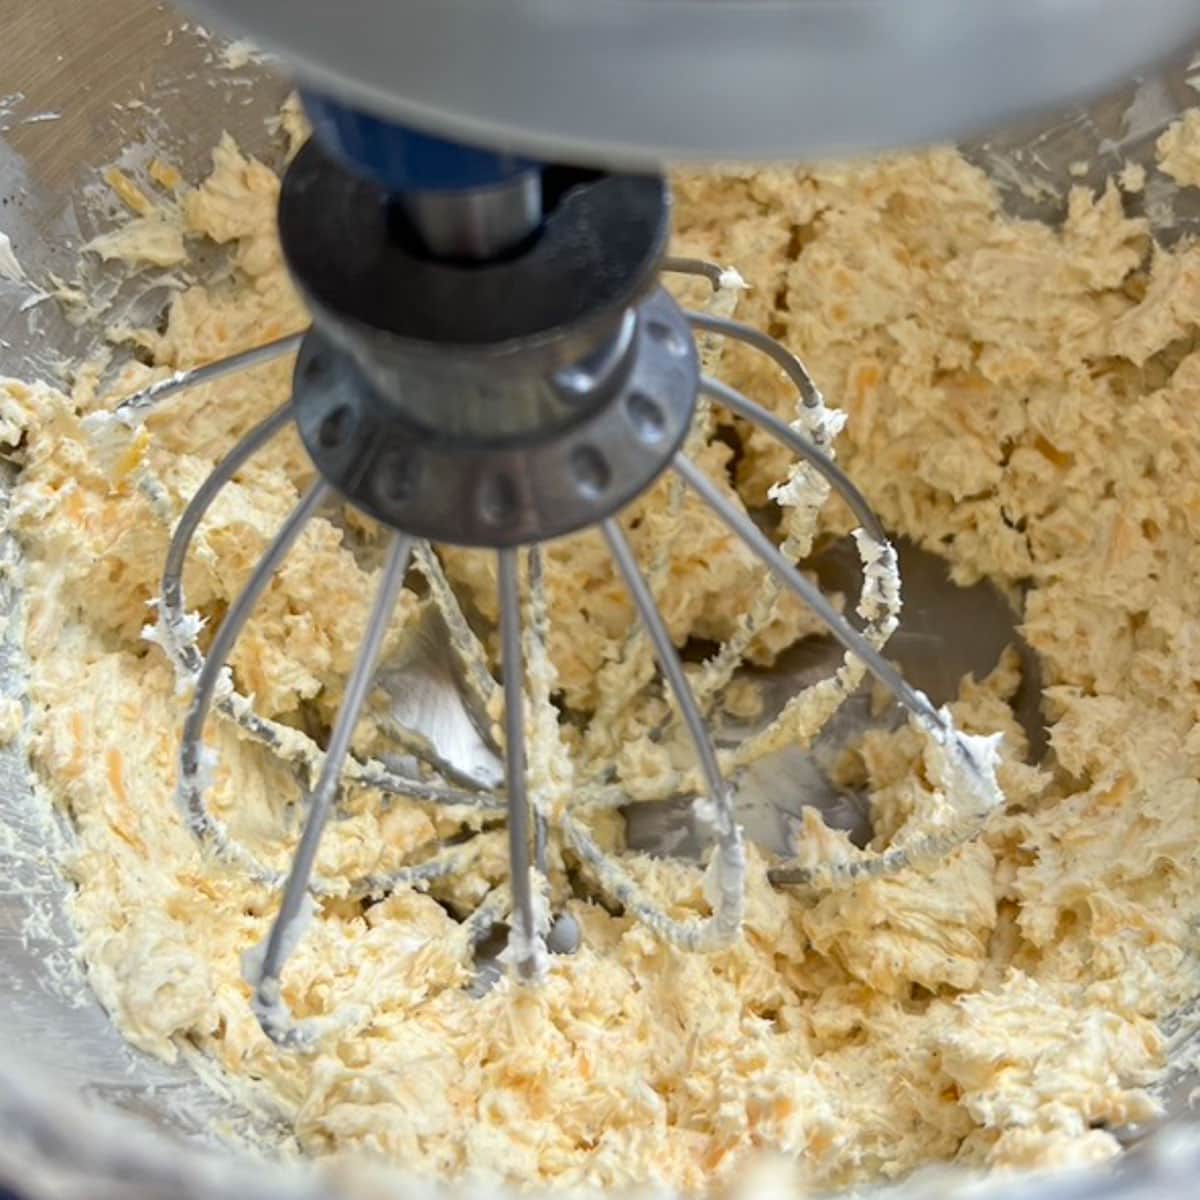 Mixer bowl with whisk inside showing when ingredients are mixed enough